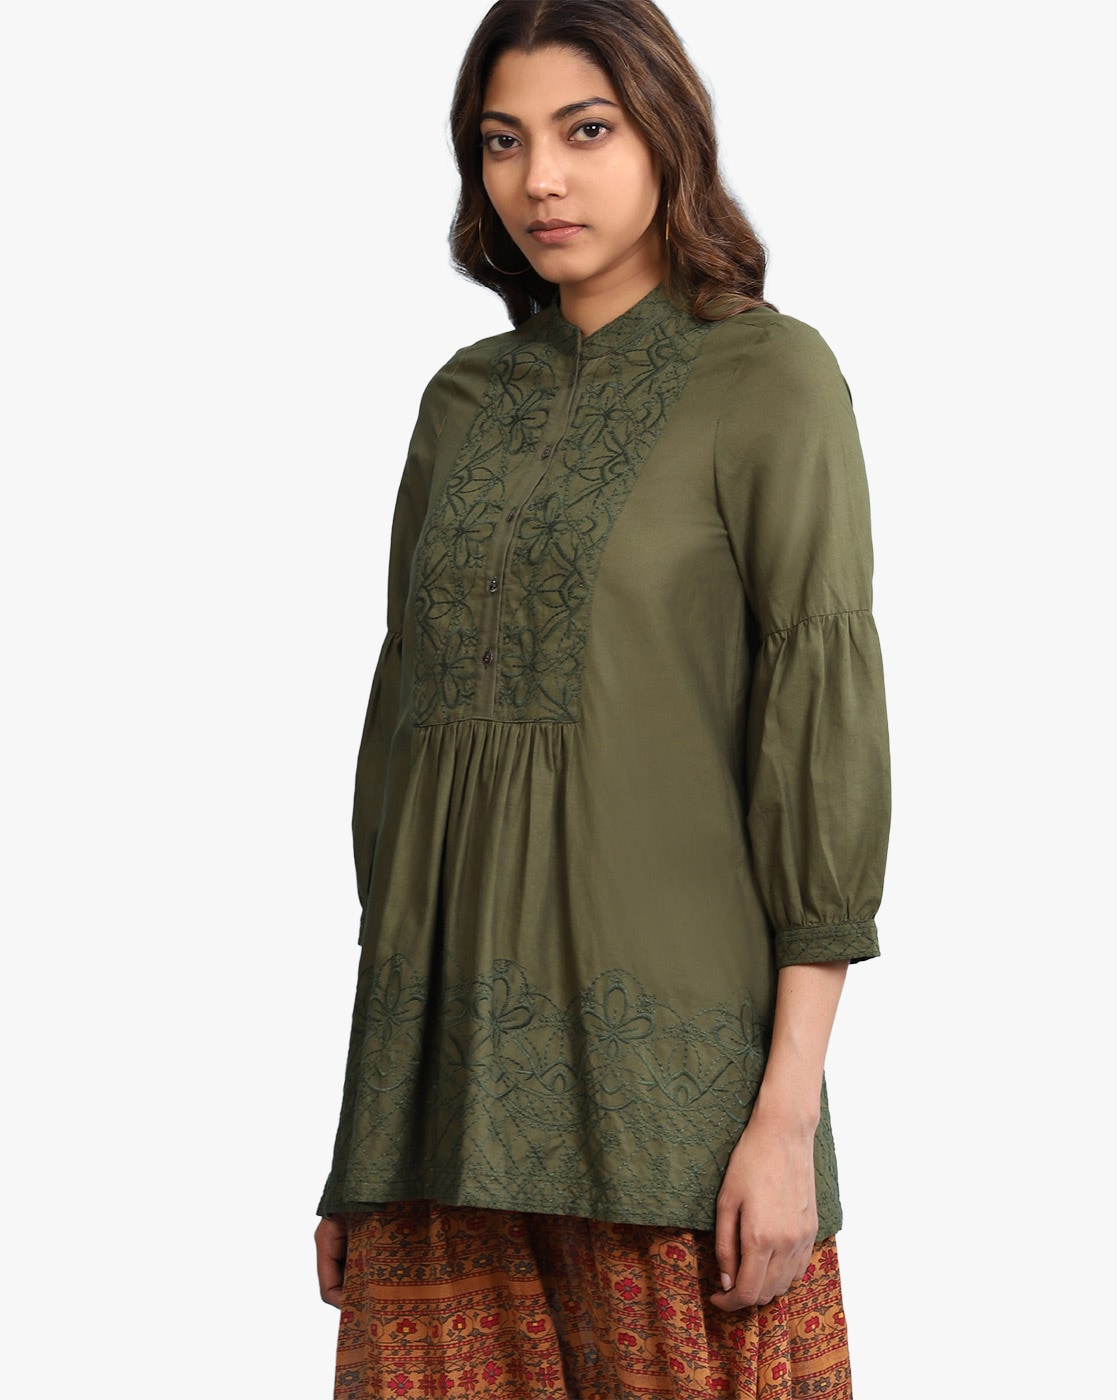 Short Kurti at best price in Surat by Sana Embroidery | ID: 14705843033